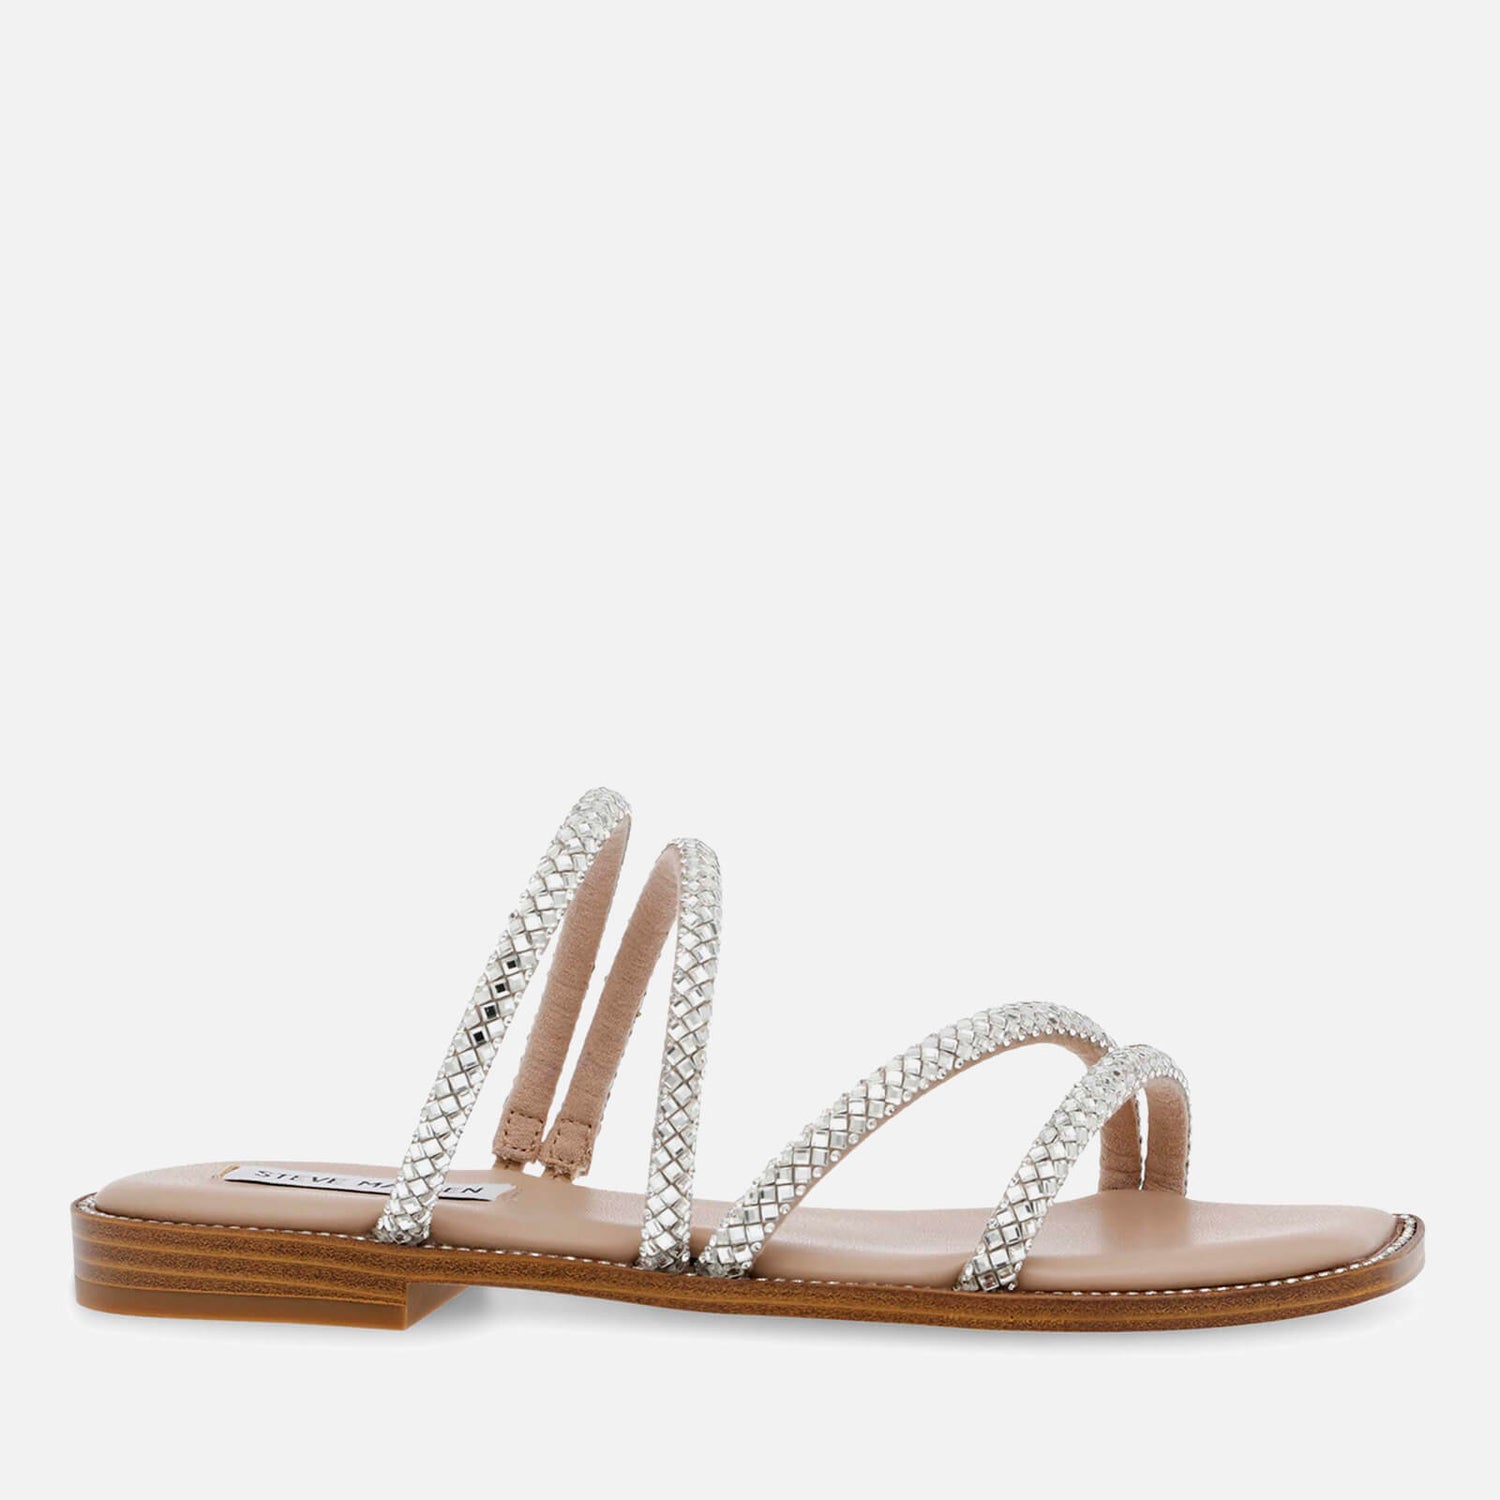 Steve Madden Women's Starie Faux Leather and Rhinestone Sandals - UK 3